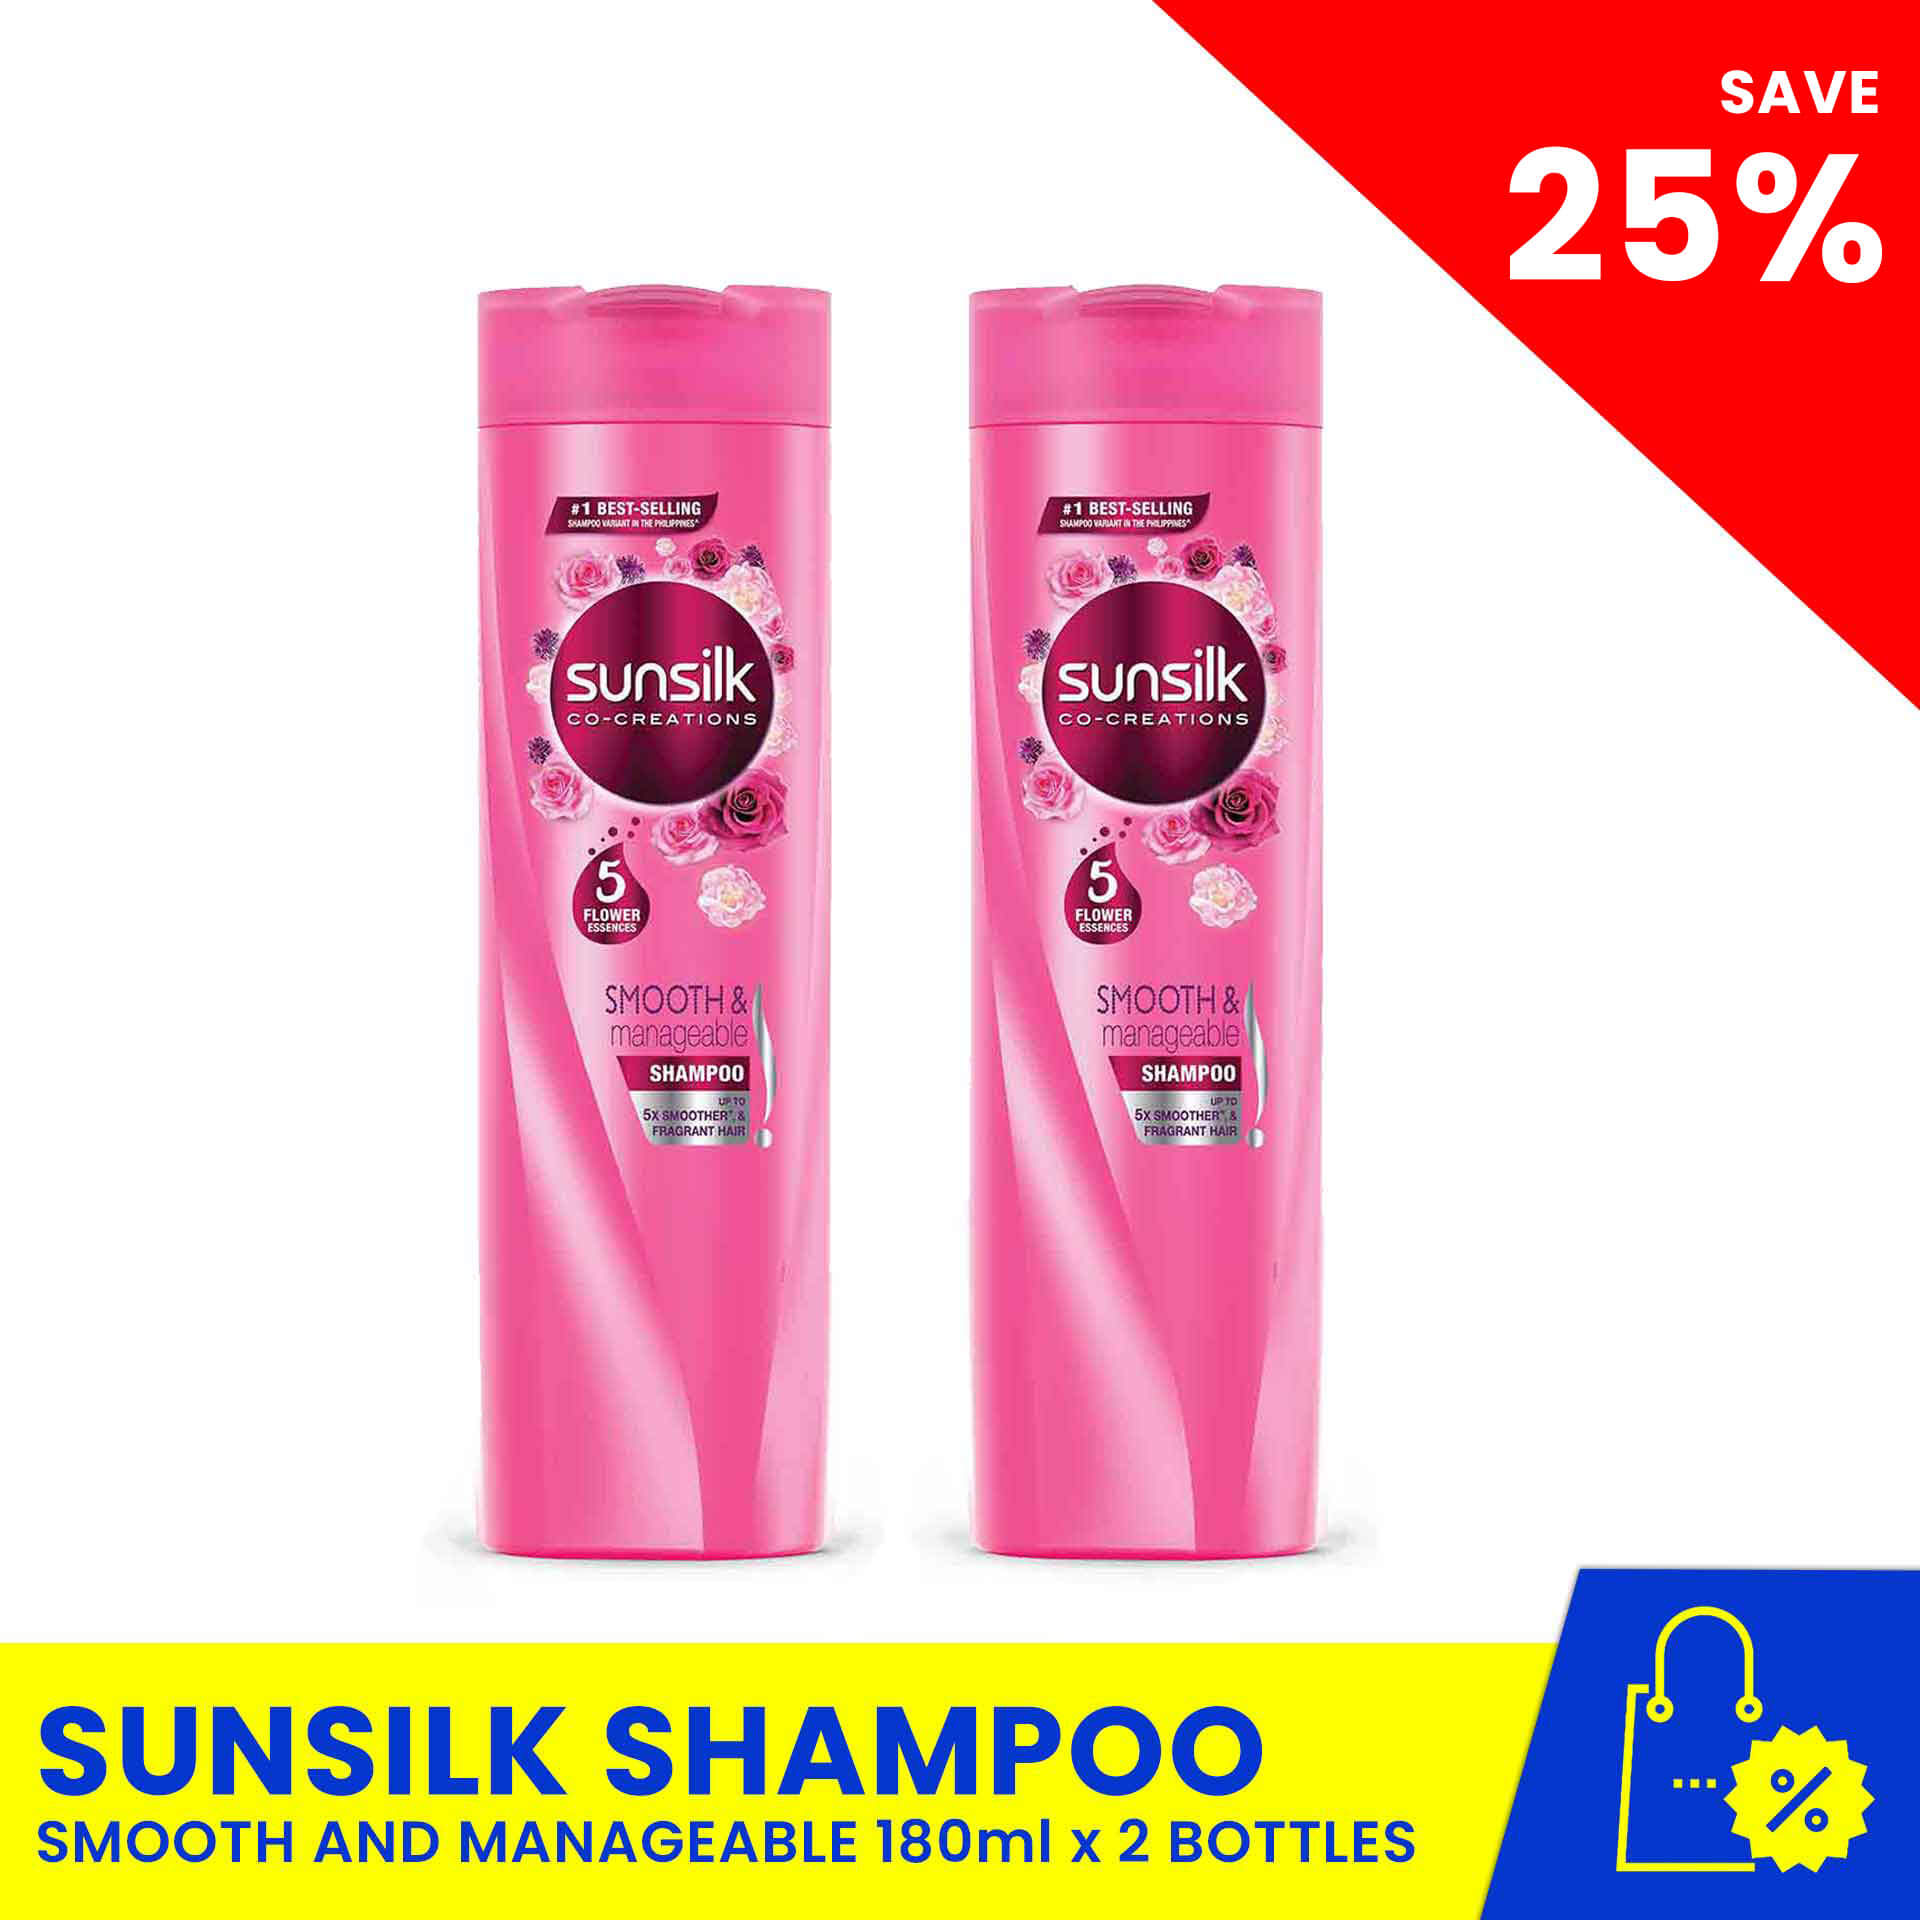 SUNSILK Shampoo Smooth & Manageable 180ml Buy 1 and Get 2nd bottle at 50% –  Biggrocer